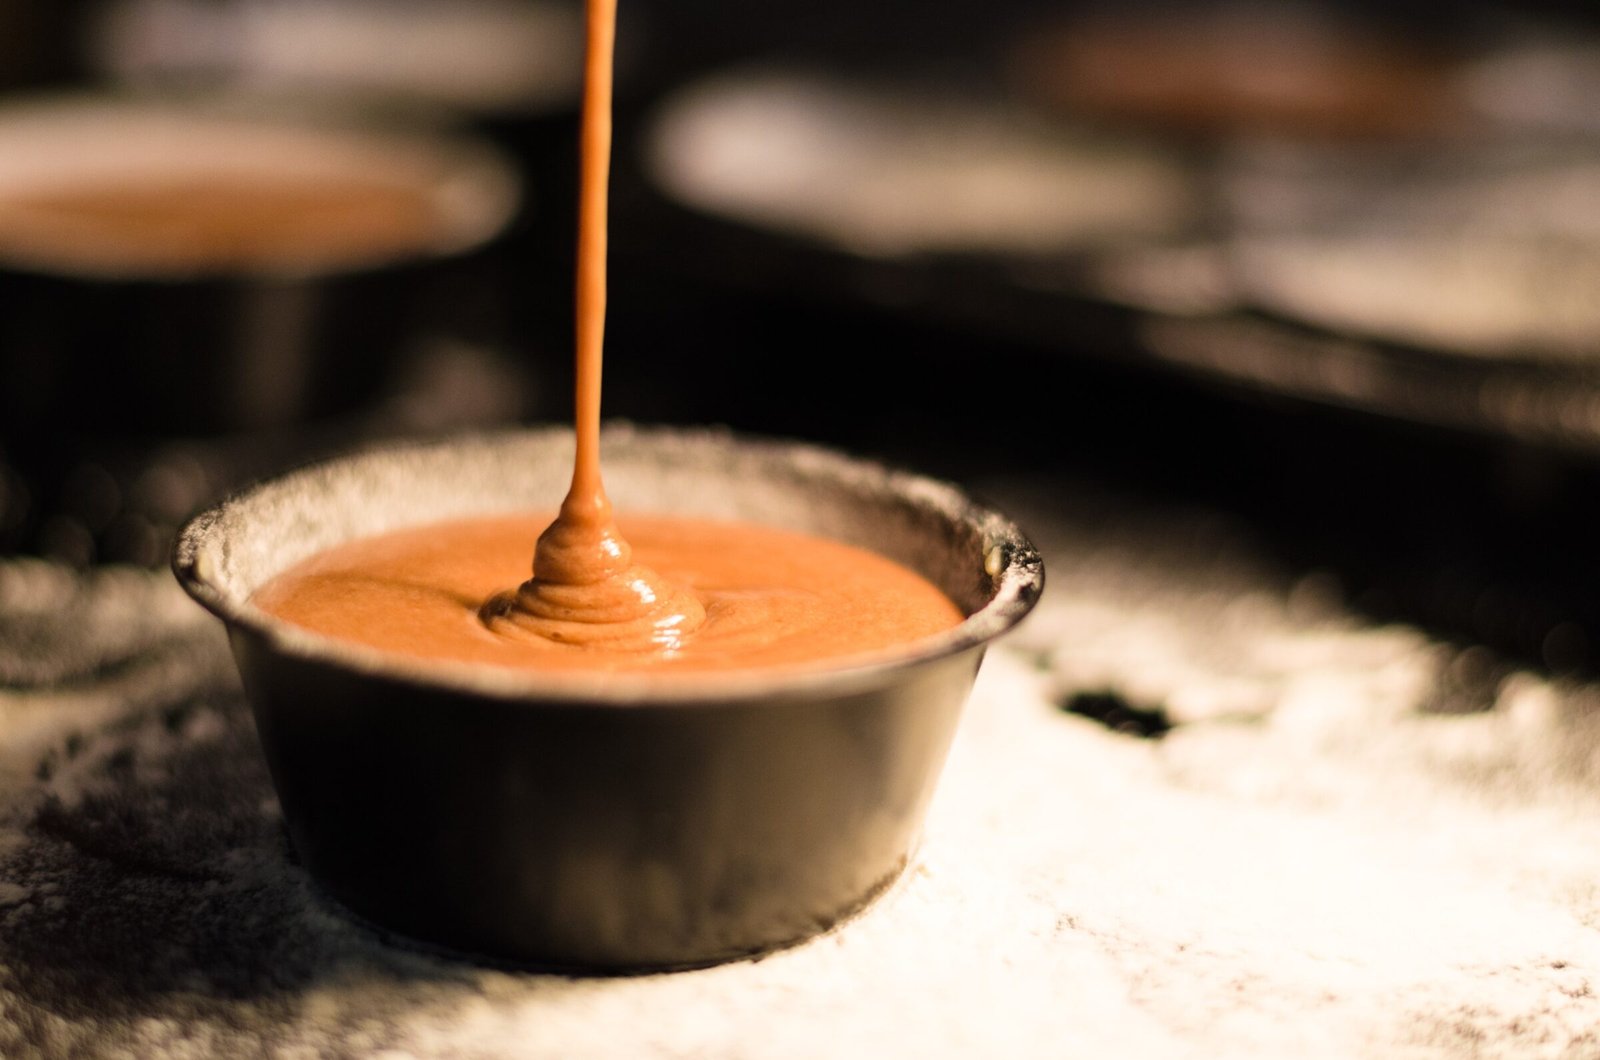 A earthenware pot is filled with caramel sauce in a rustic kitchen setting